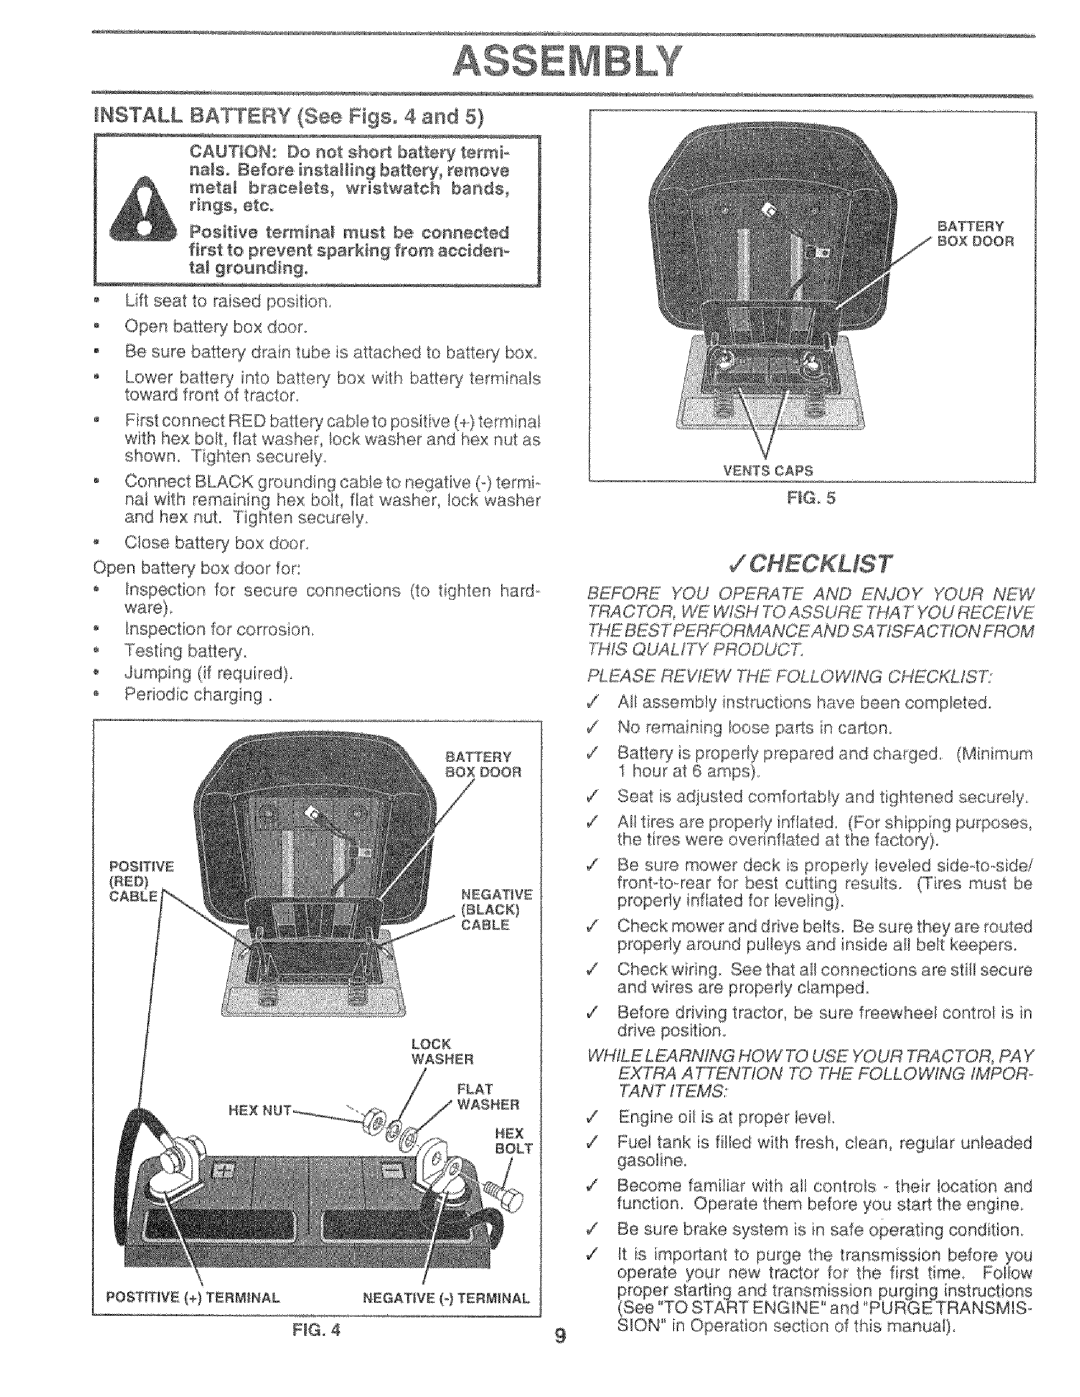 Sears 917.25759 manual INSTALL BATTERY See Figs,4 and 